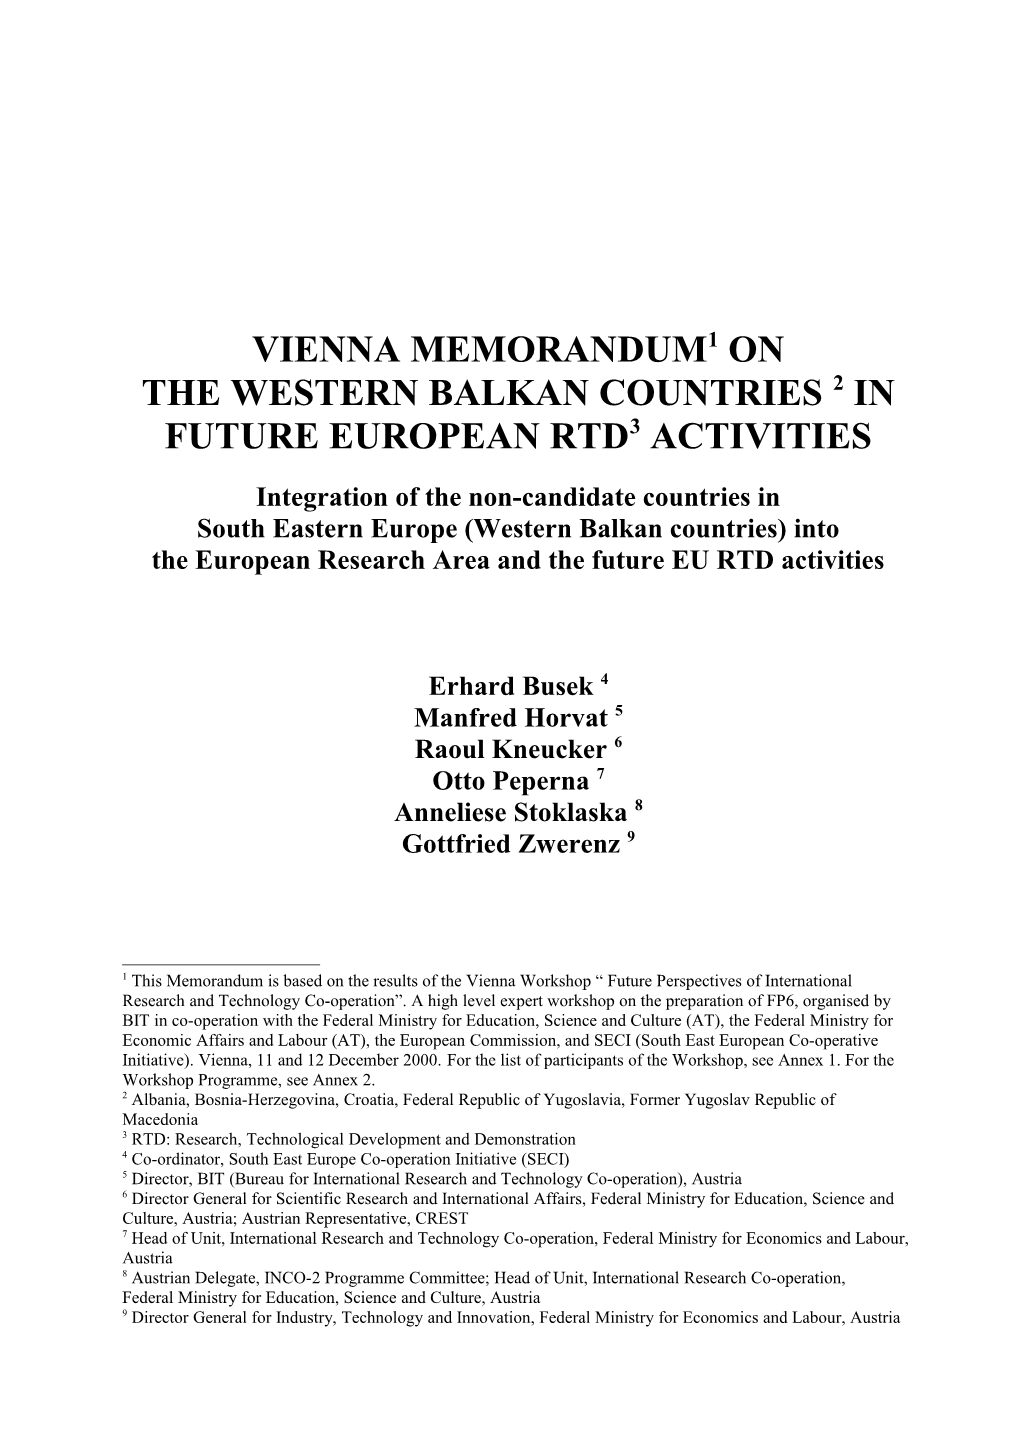 Vienna Paper on the West Balkans in FP6